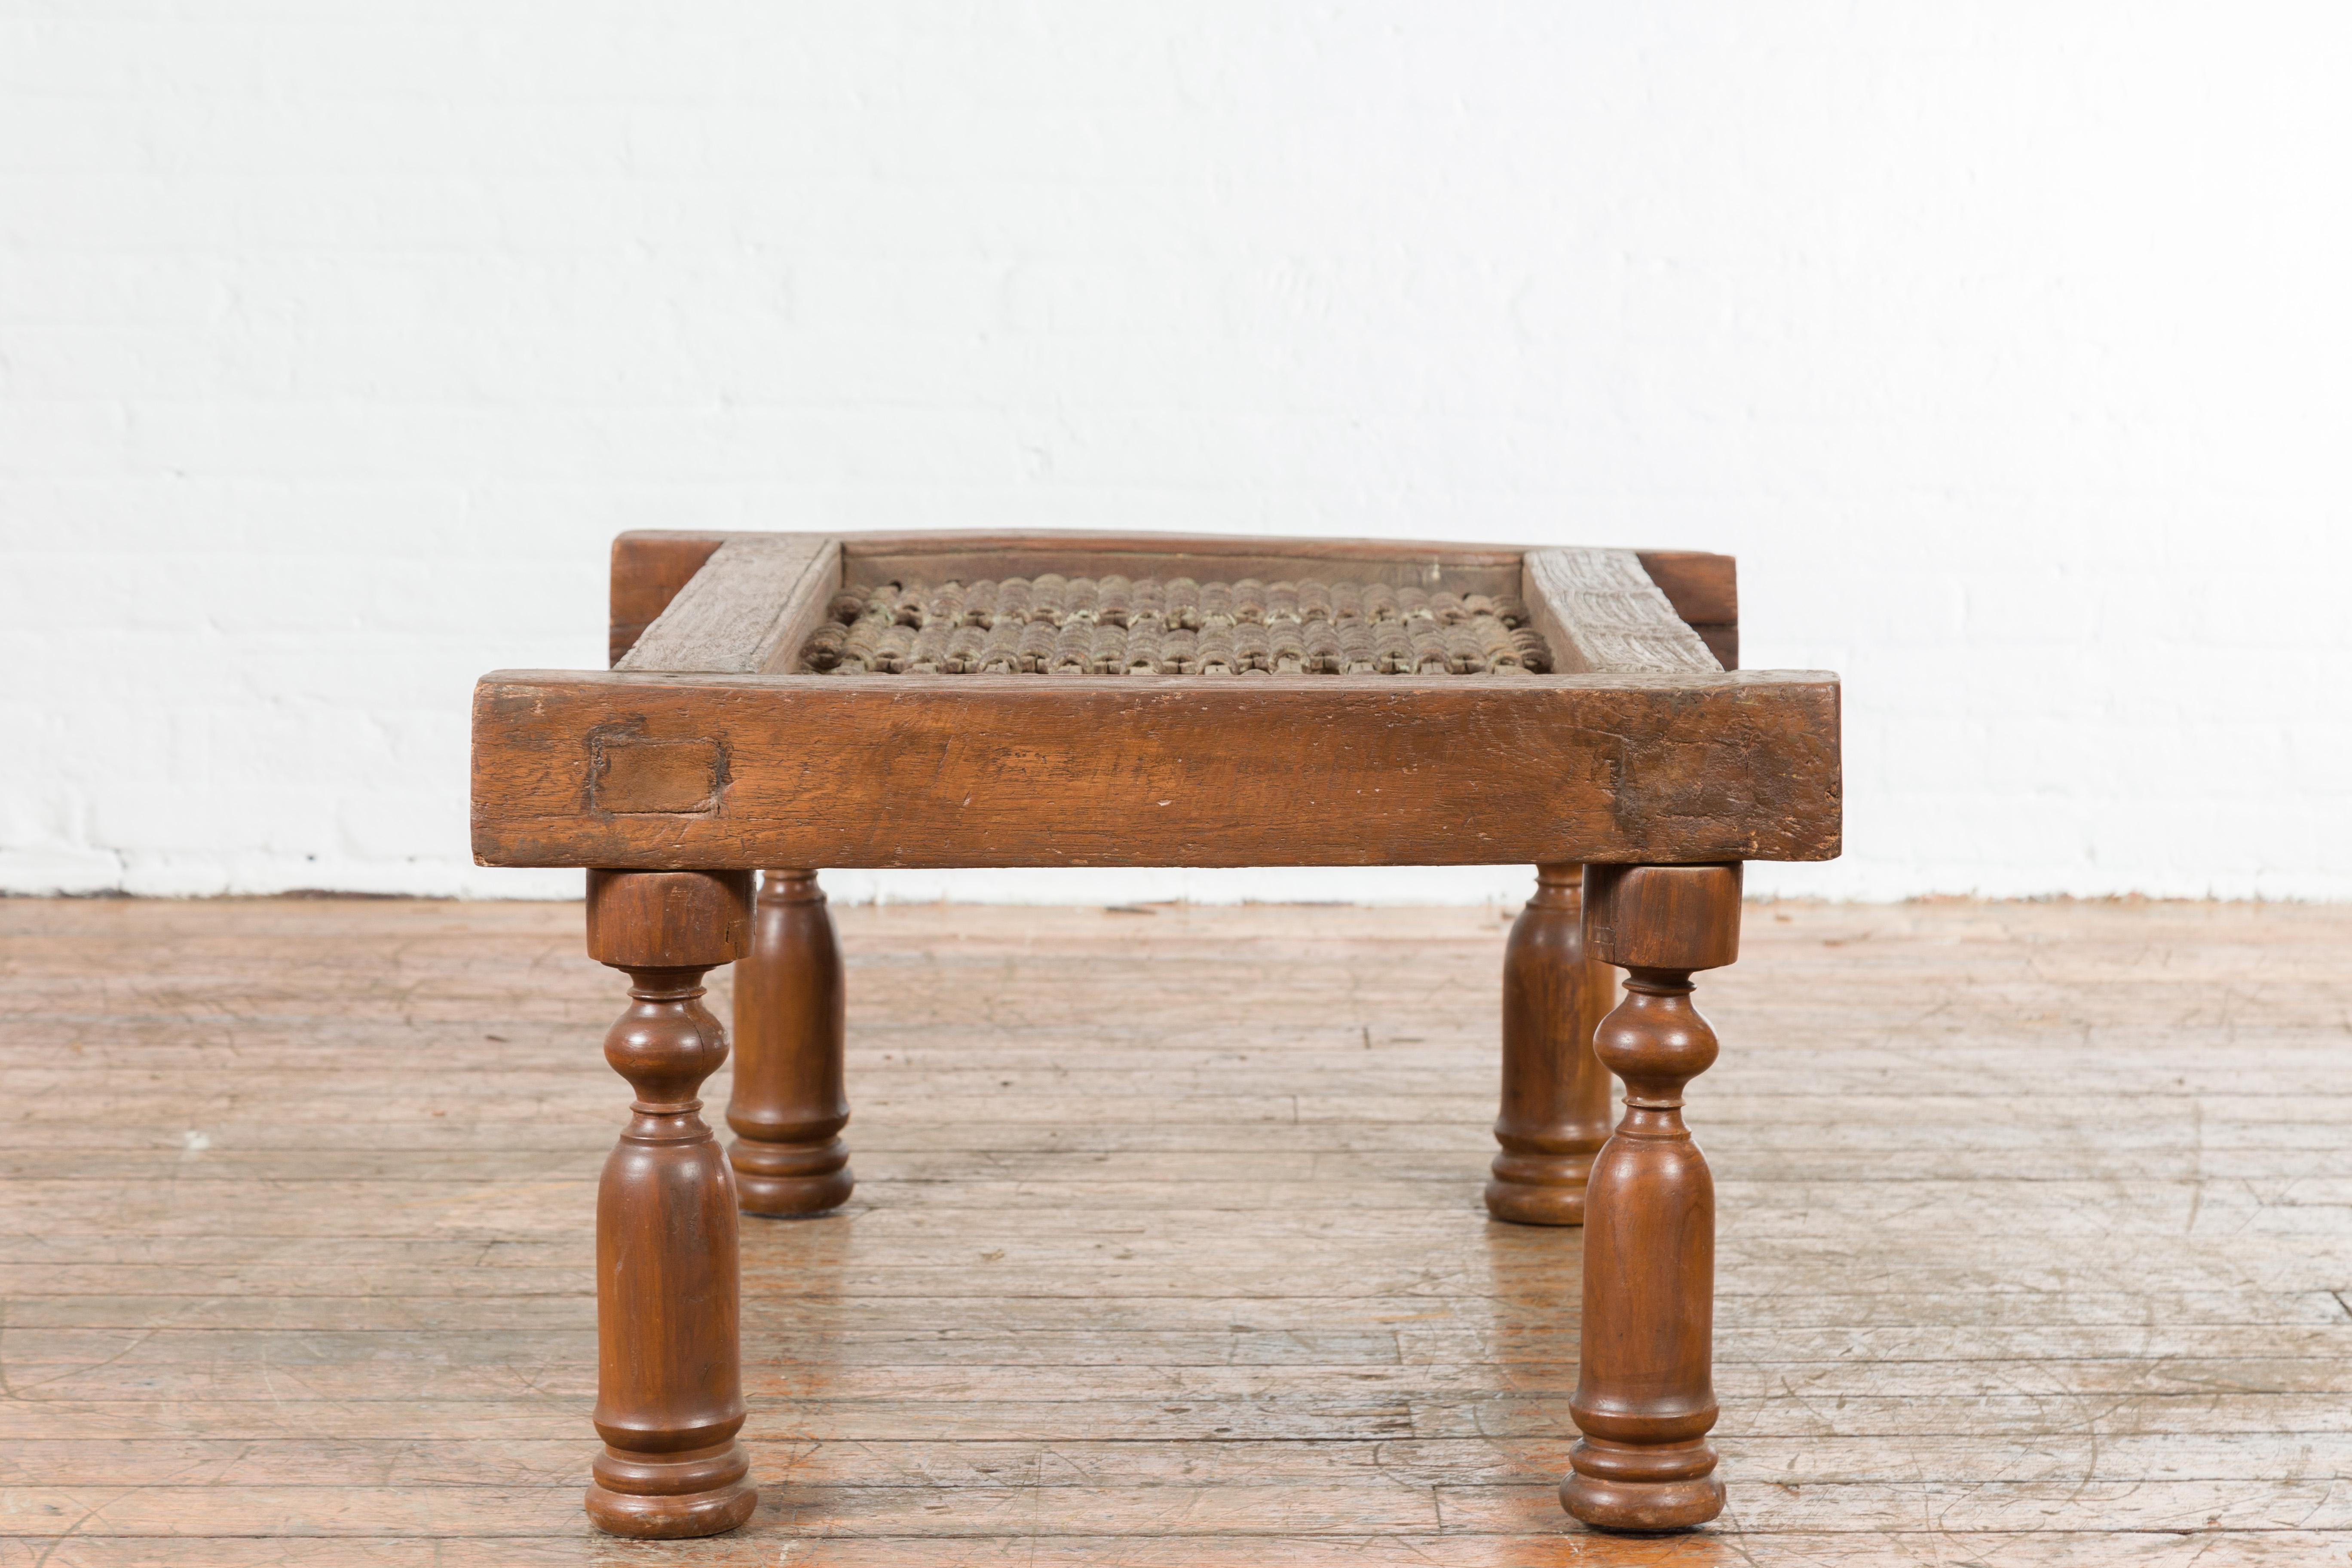 Antique Indian Arched Window Grate Made into a Coffee Table with Baluster Legs For Sale 1